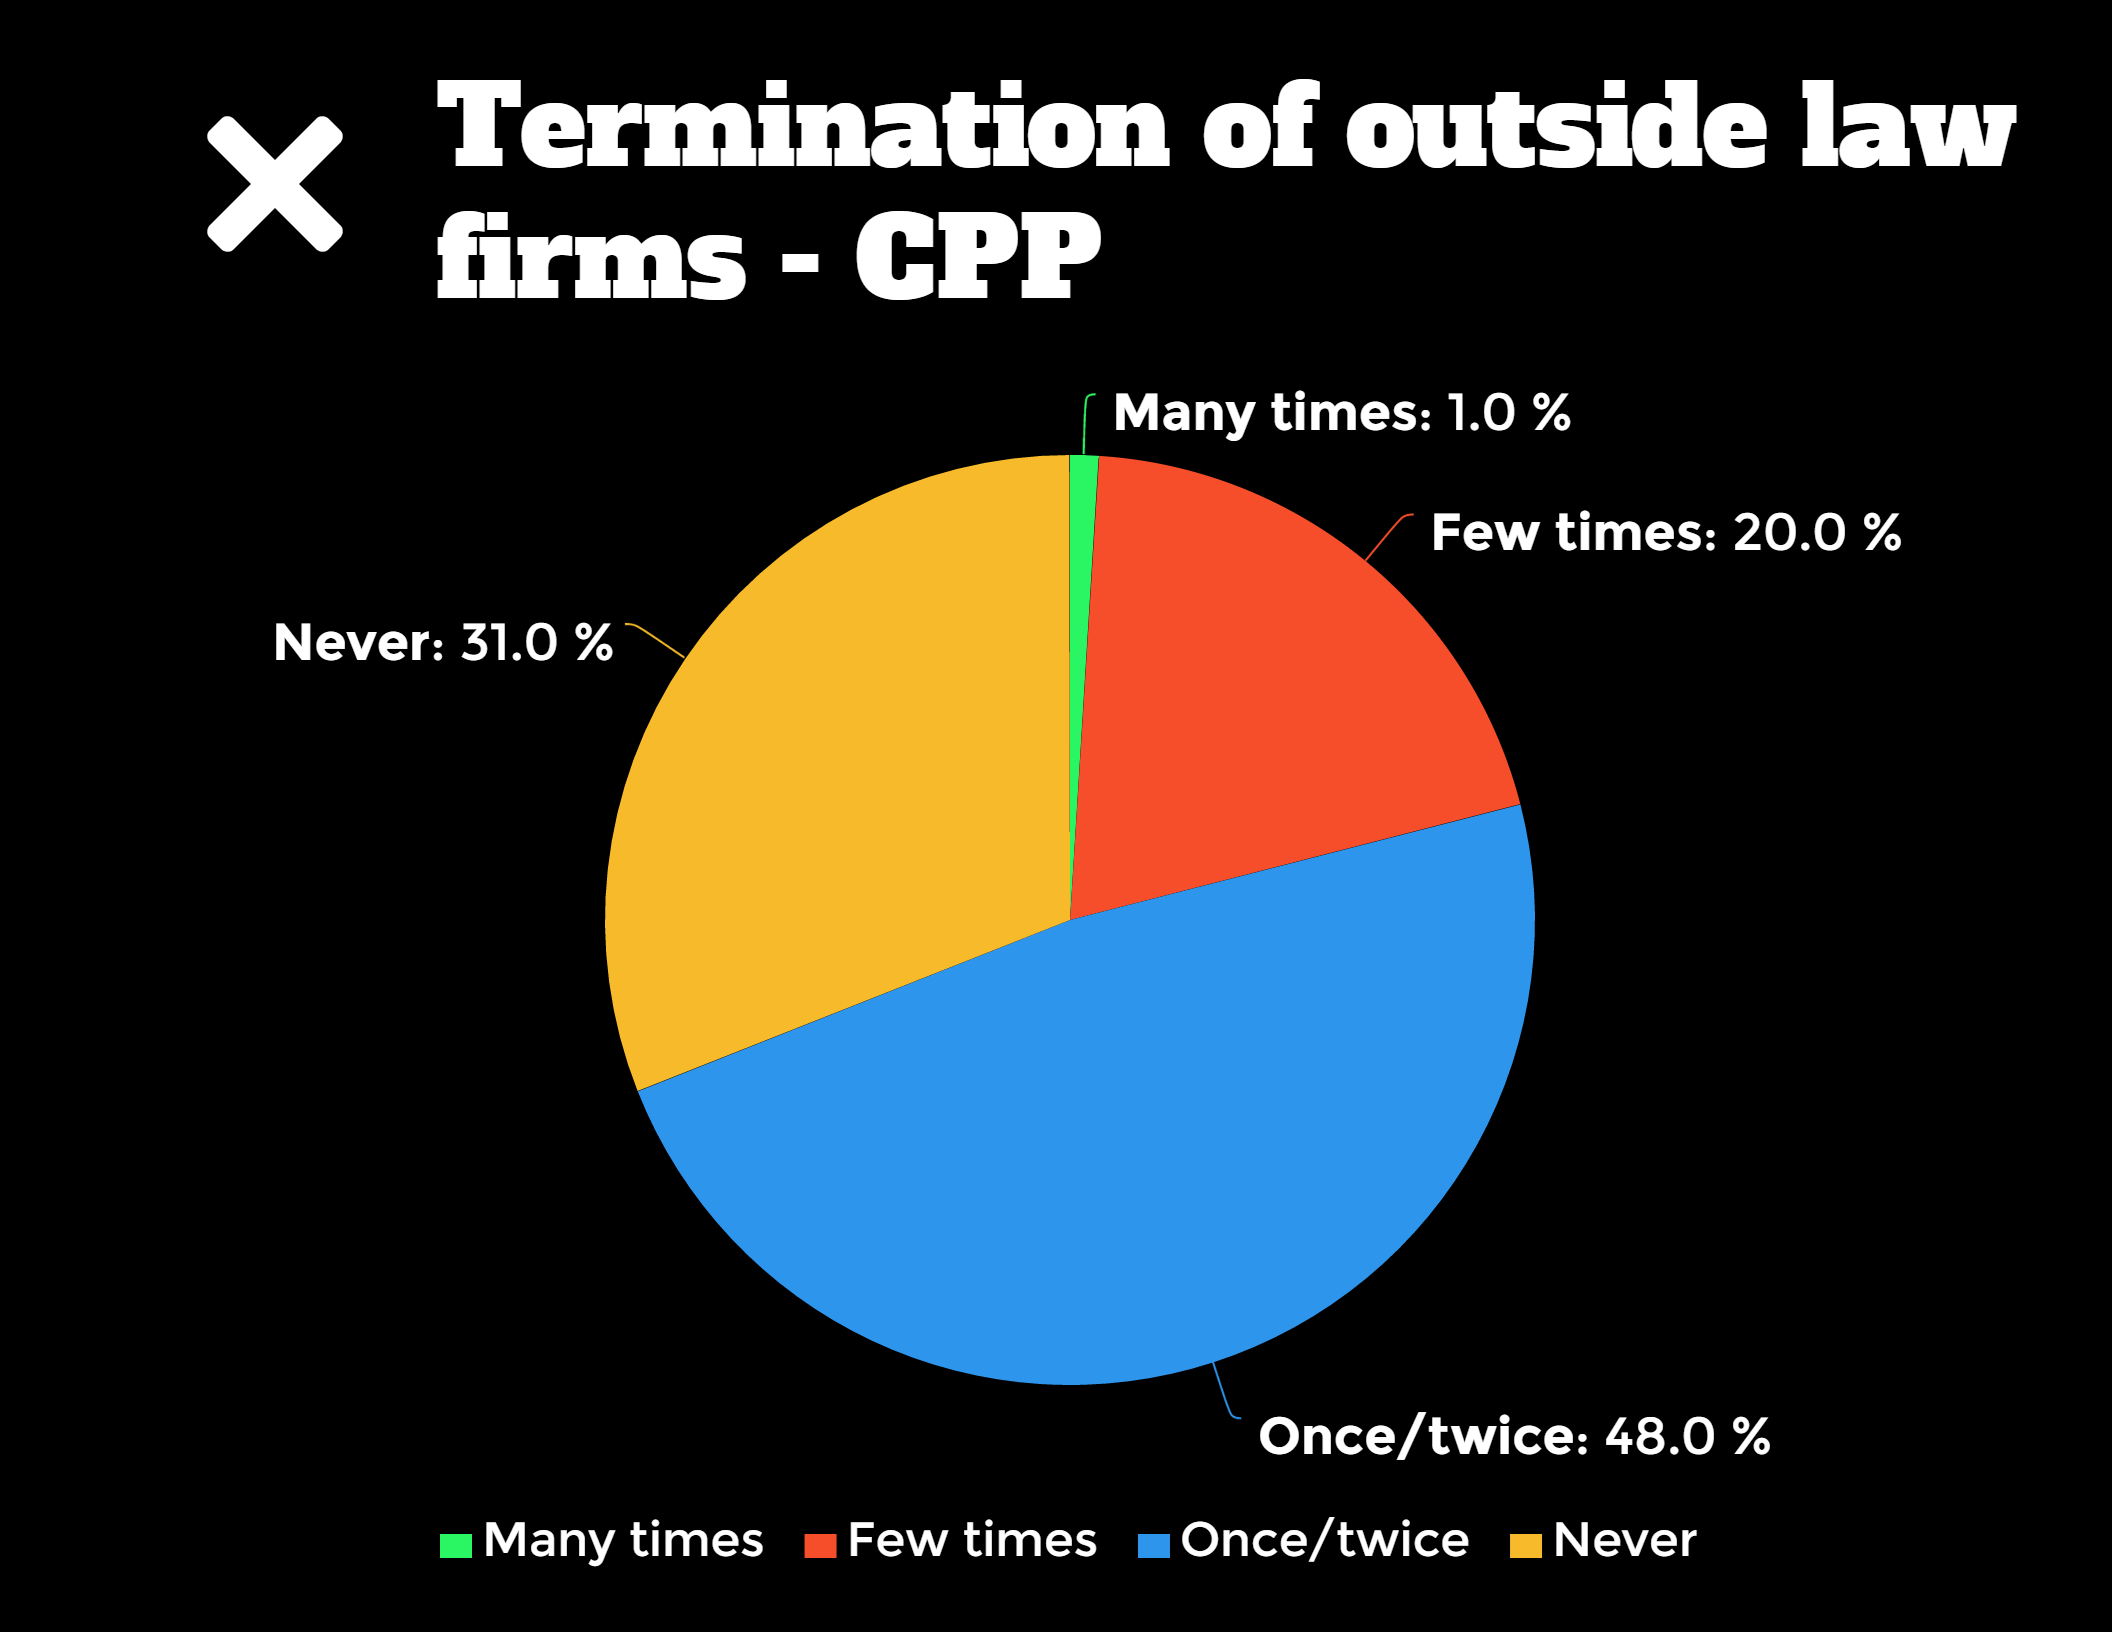 Pie chart that shows termination of outside law firms from the Corporate Purchasing Project, including 31% never, 48% once/twice, 20% few times, and 1.0% many times.